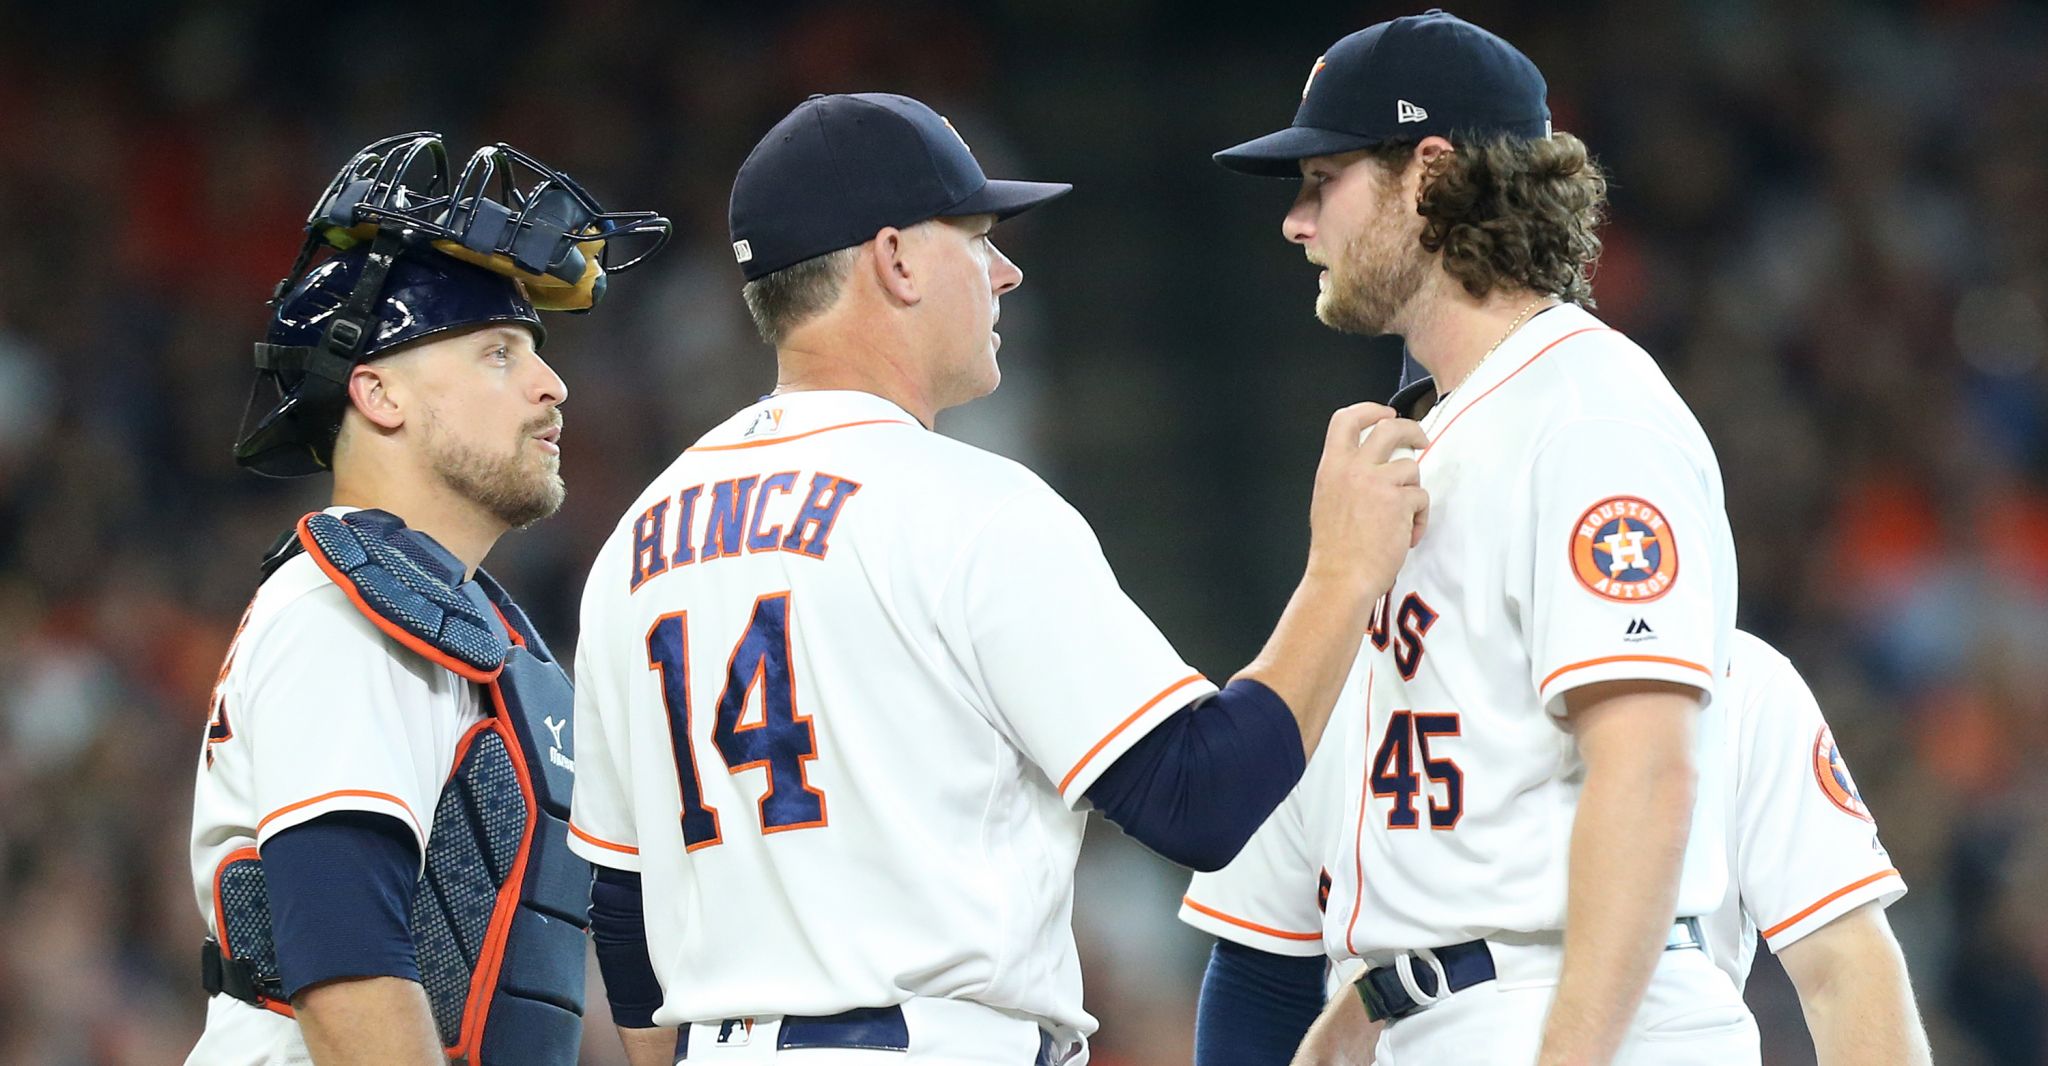 Gerrit Cole returns to carry Astros past Tigers - Houston Chronicle2048 x 1066